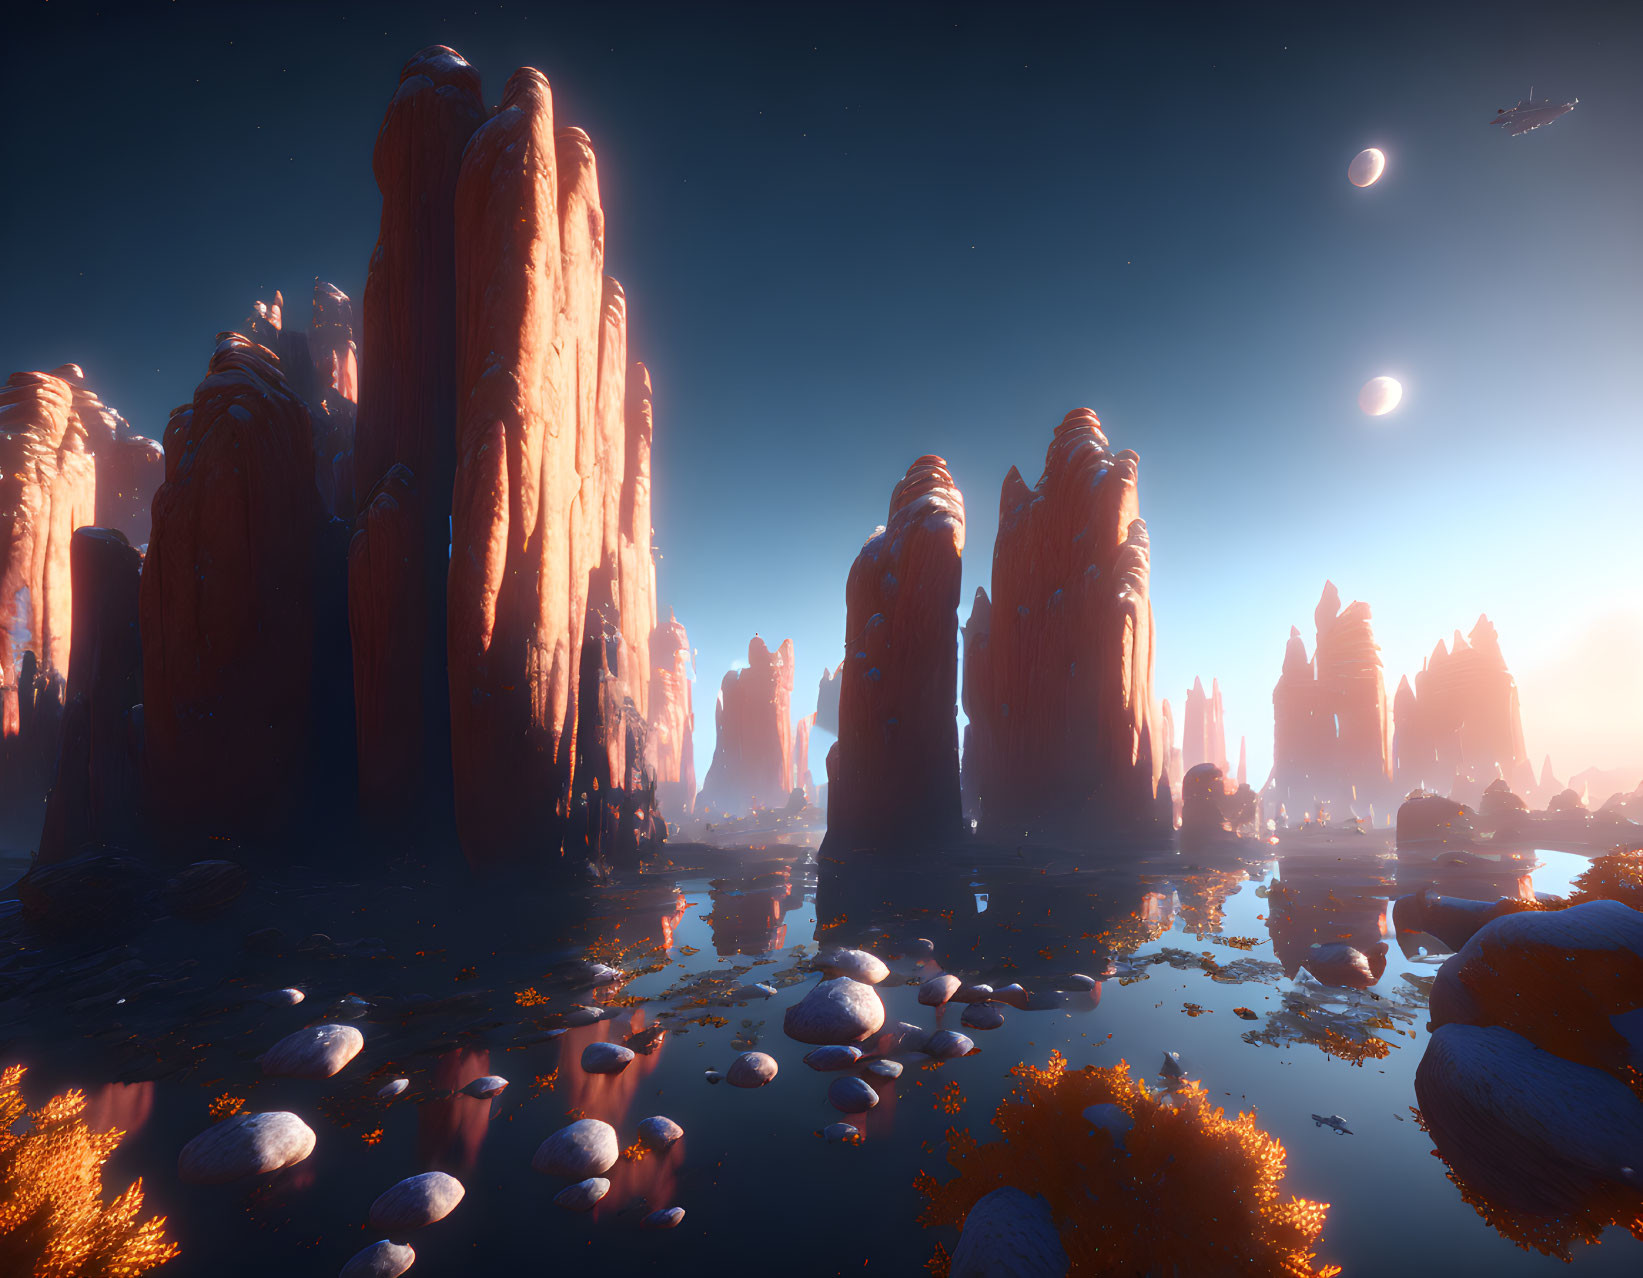 Alien landscape with red rock formations, calm water, moons, and spaceships